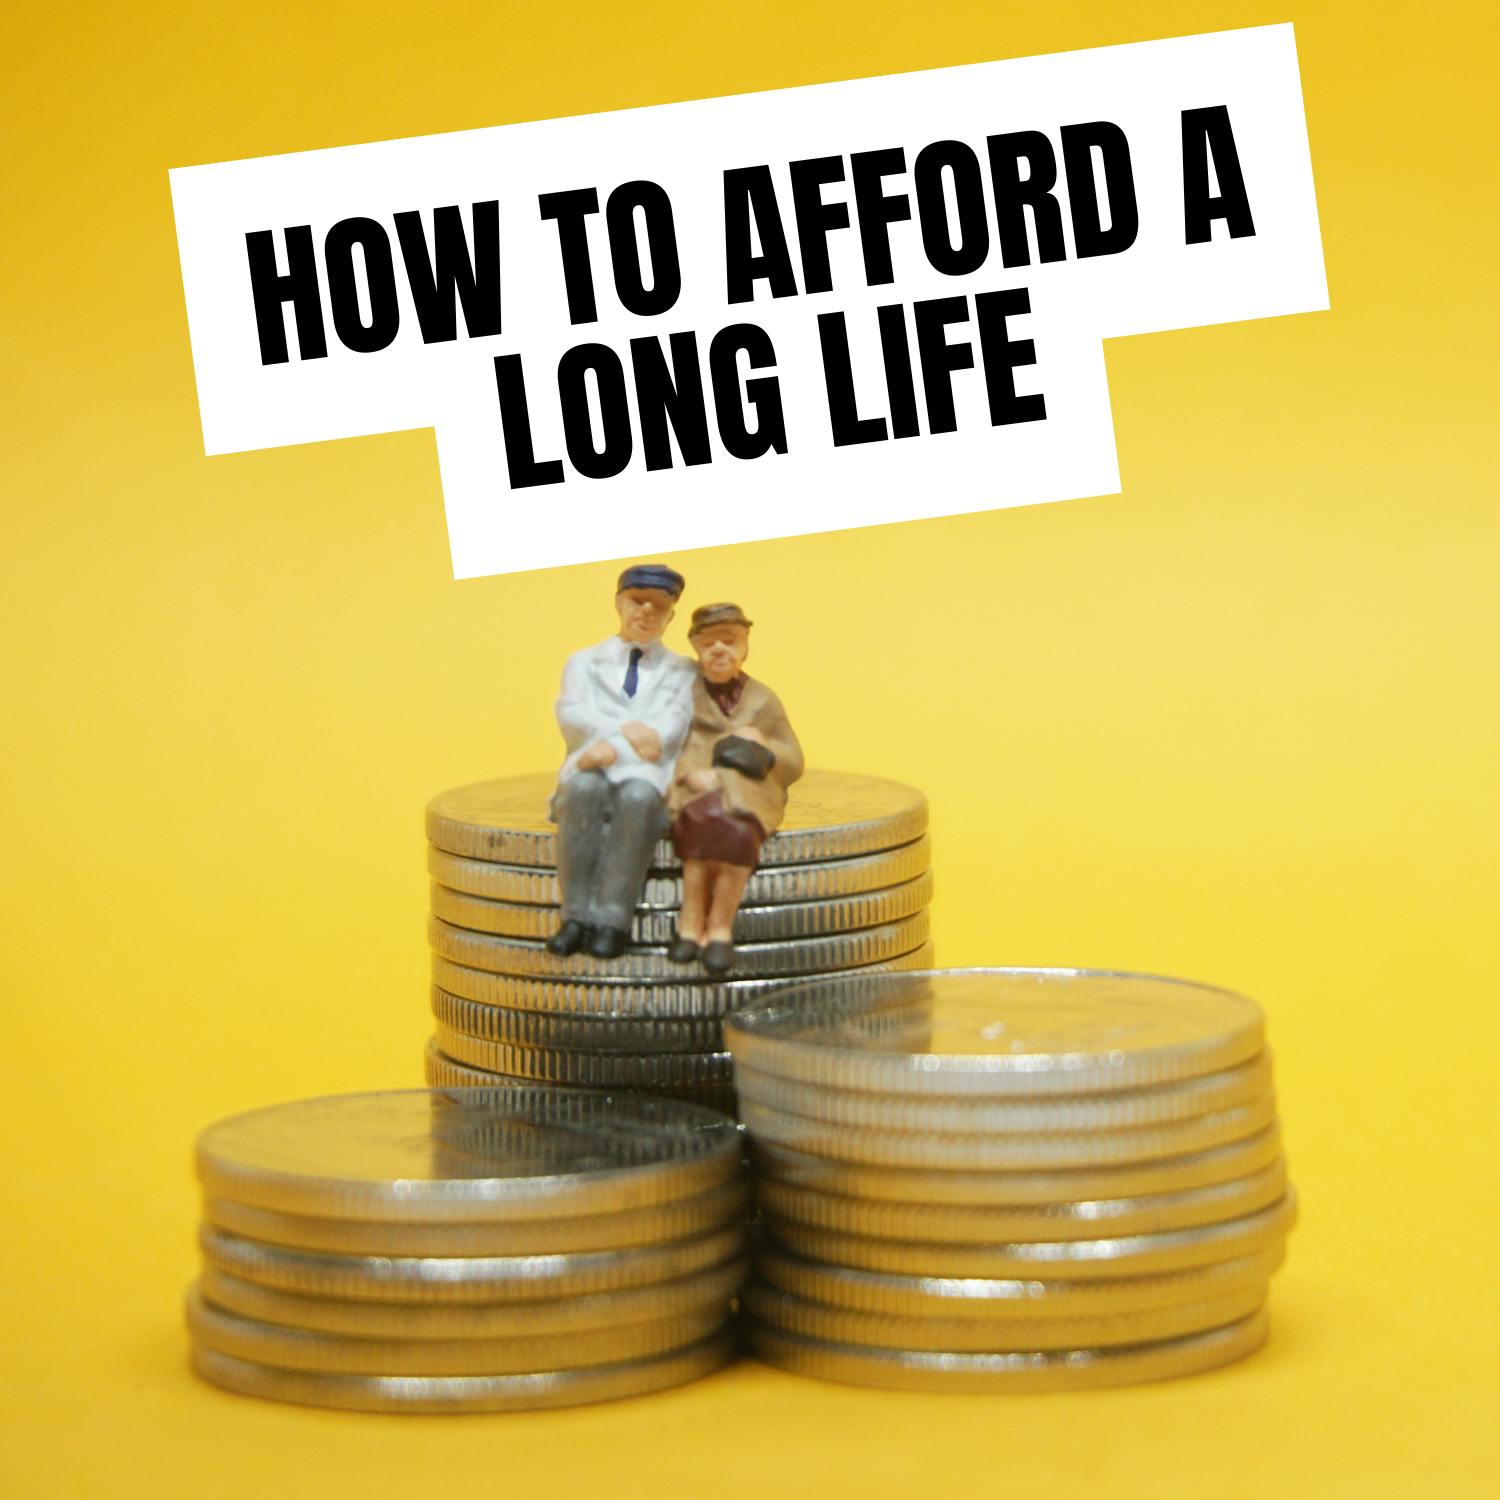 We're Living Longer— But Can We Afford To? You Can With These Tips!